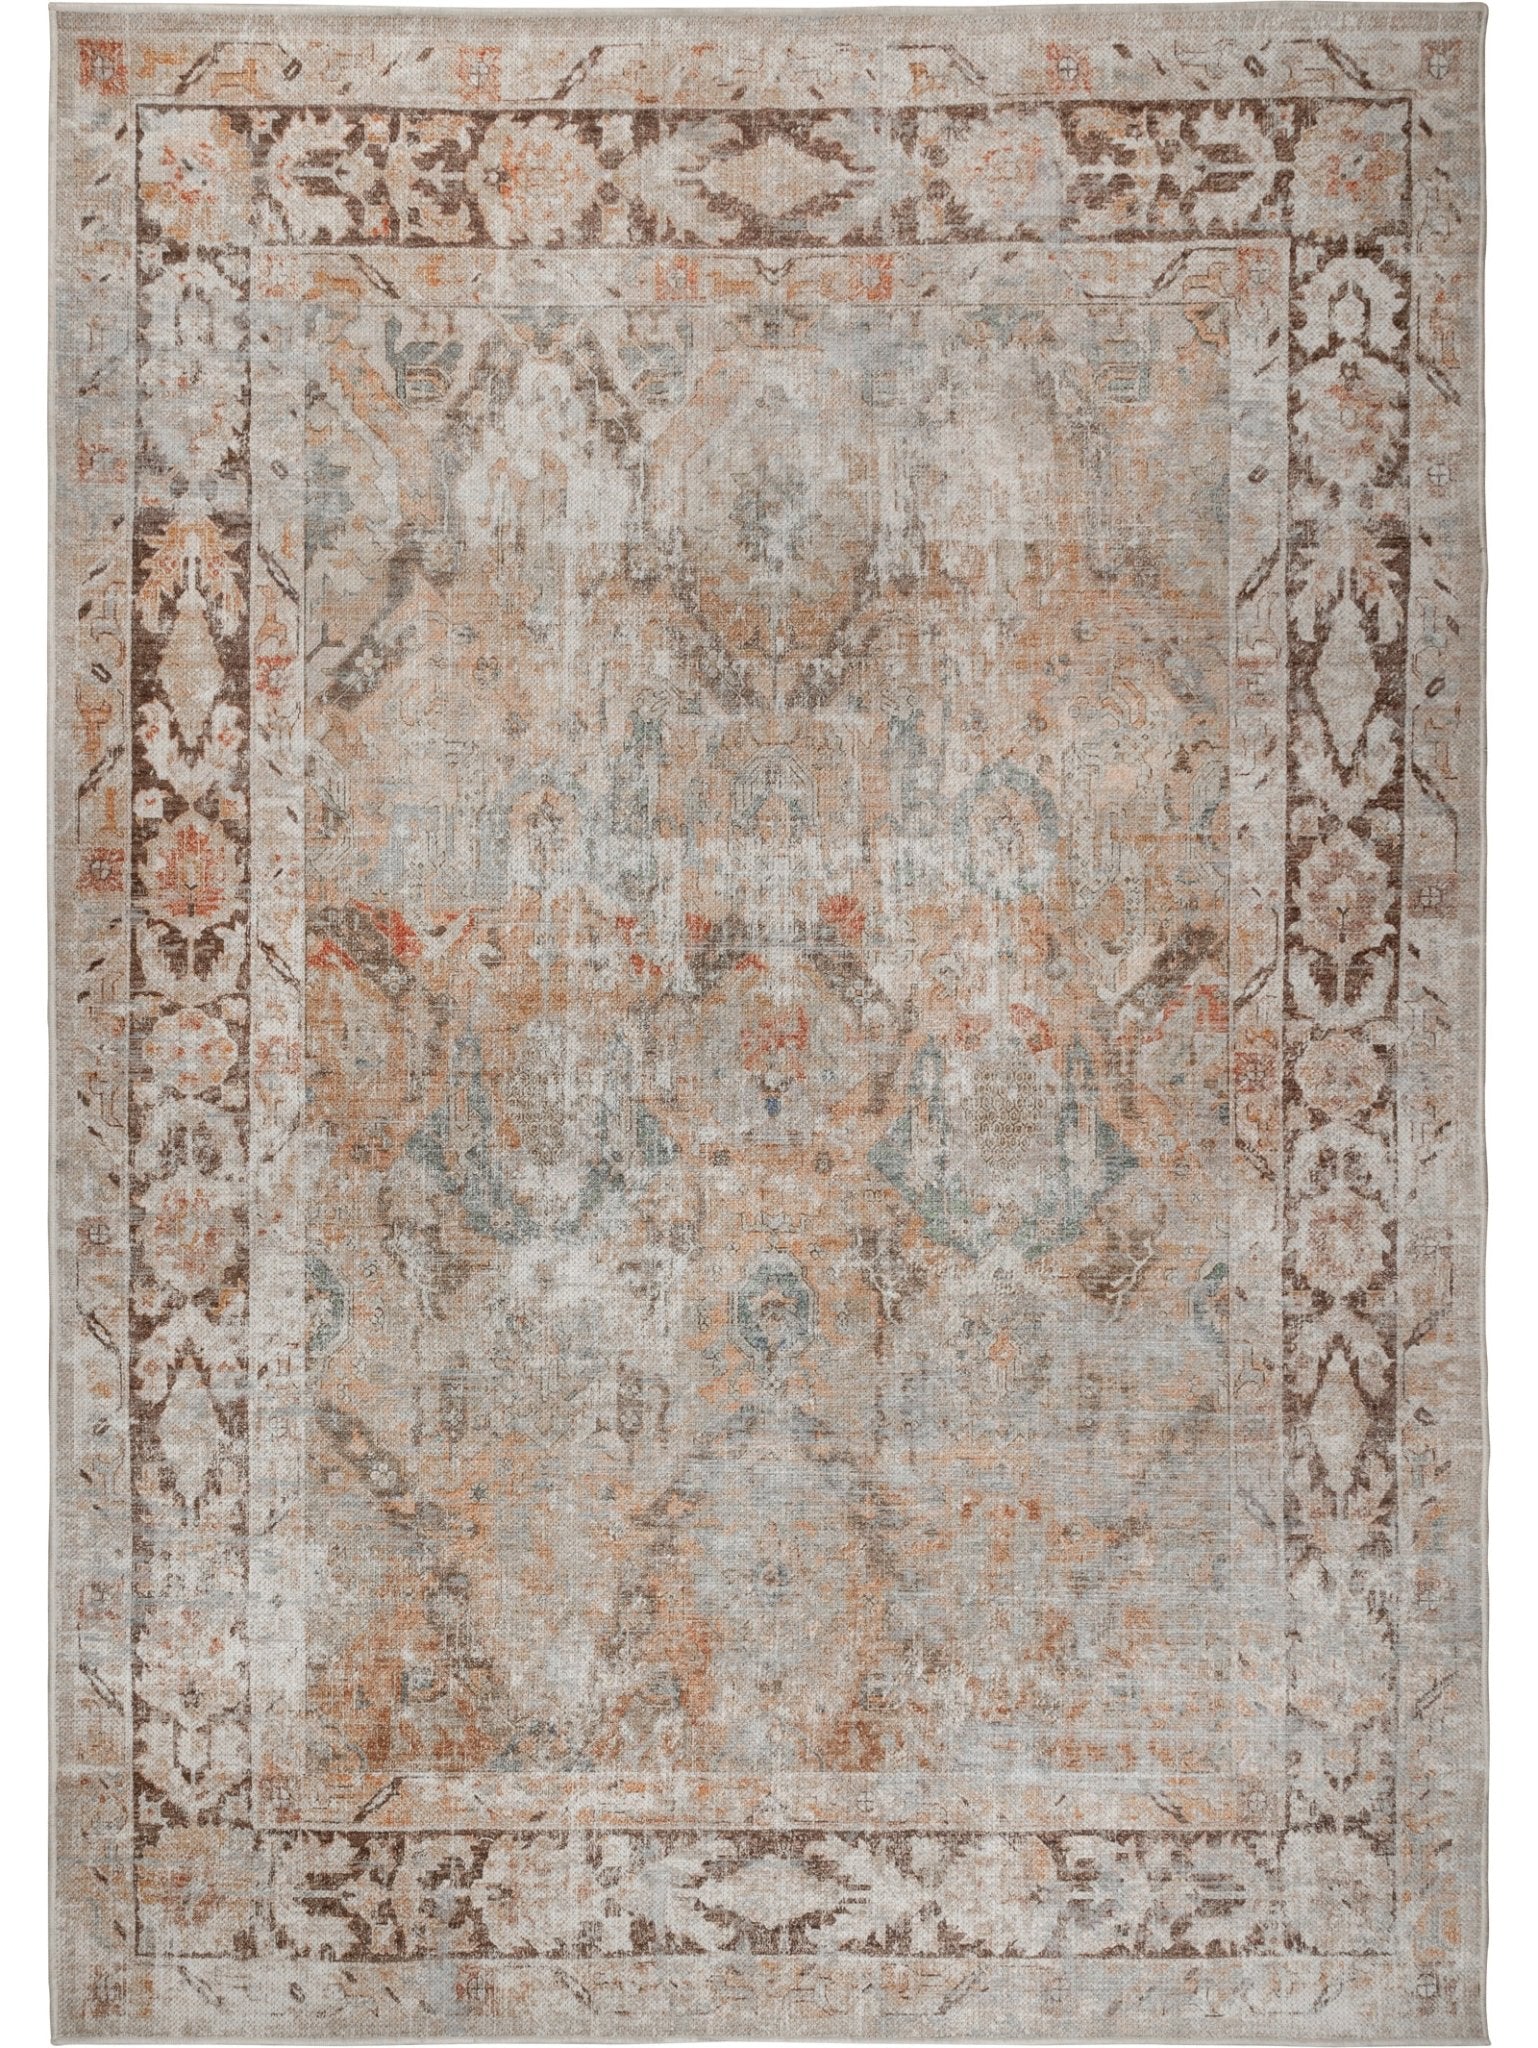 Affection Rug in Artifact